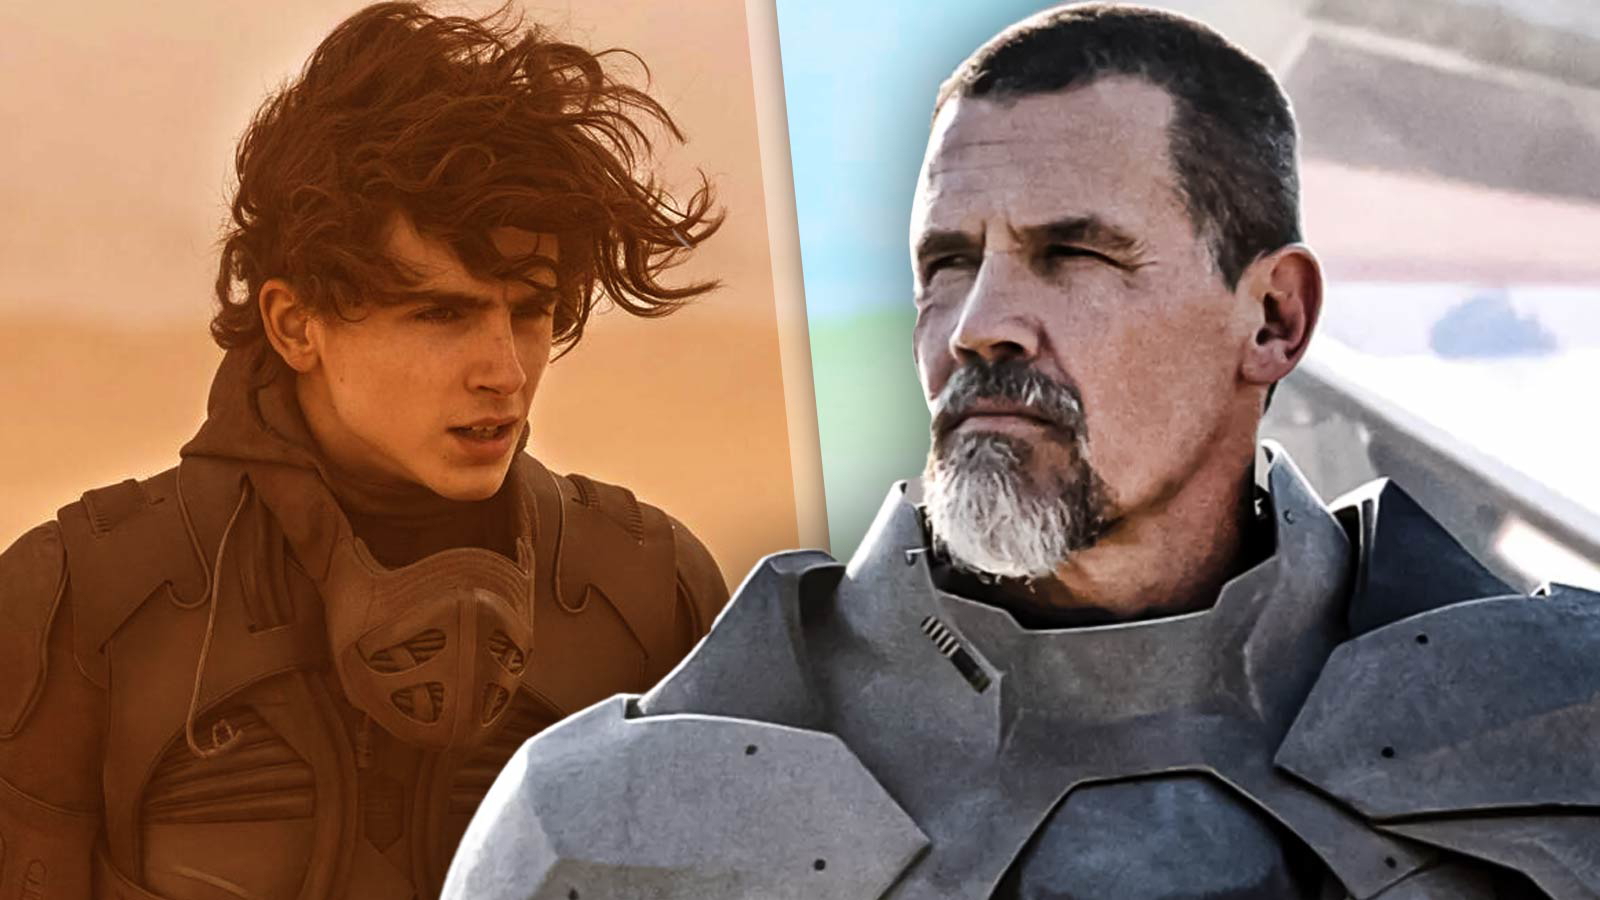 “It’s not going to deter me”: ‘Dune’ Actor Helped Josh Brolin Land a Movie Role After Sorting Out His Hardcore Obsession